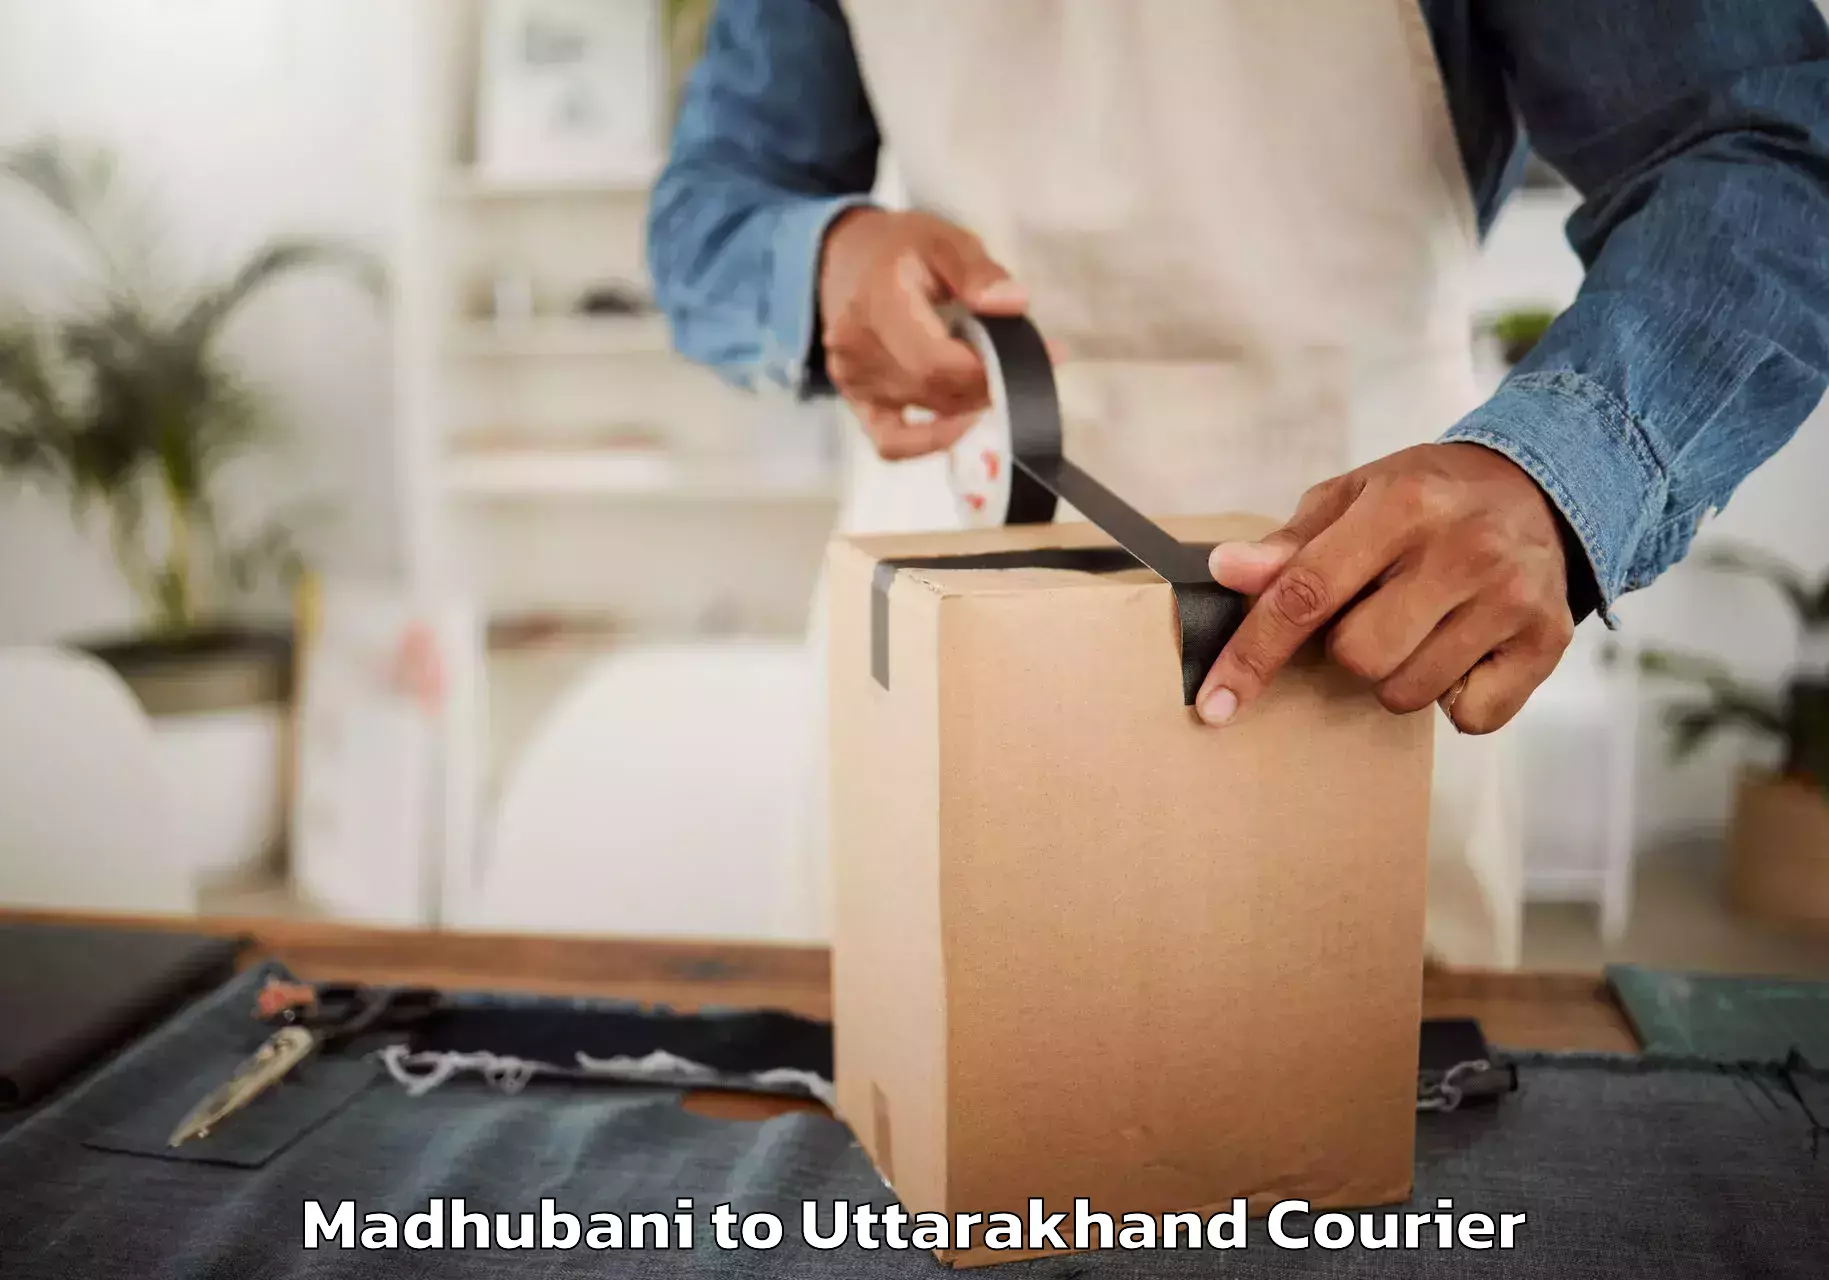 Reliable furniture movers in Madhubani to Mussoorie